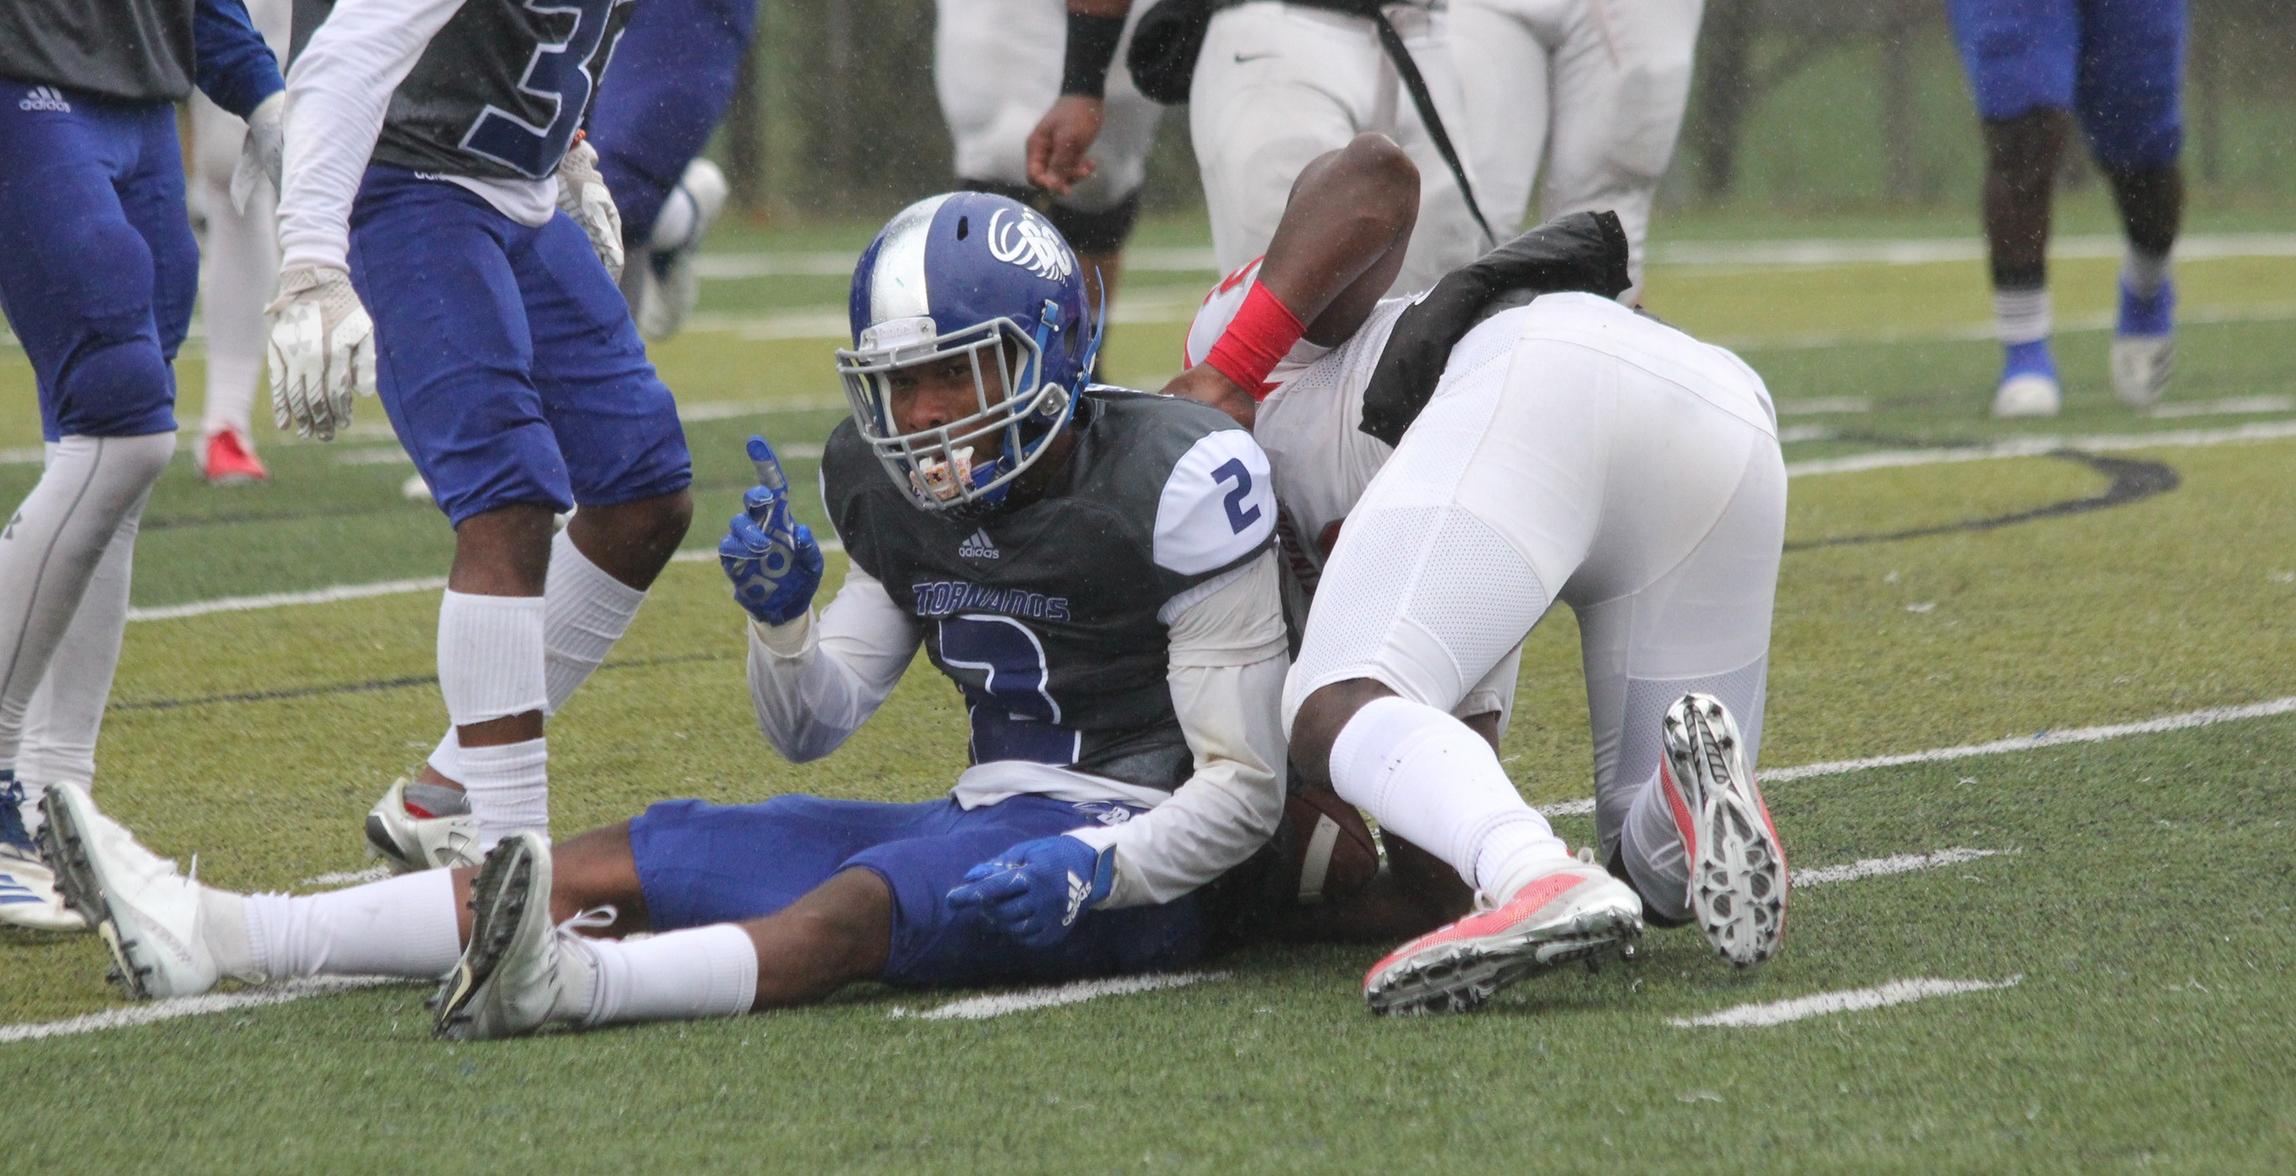 Dante Anderson led the Tornados with 11 tackles in their 2021 Spring season-opener at Huntingdon (Photo courtesy of Jean Peck).